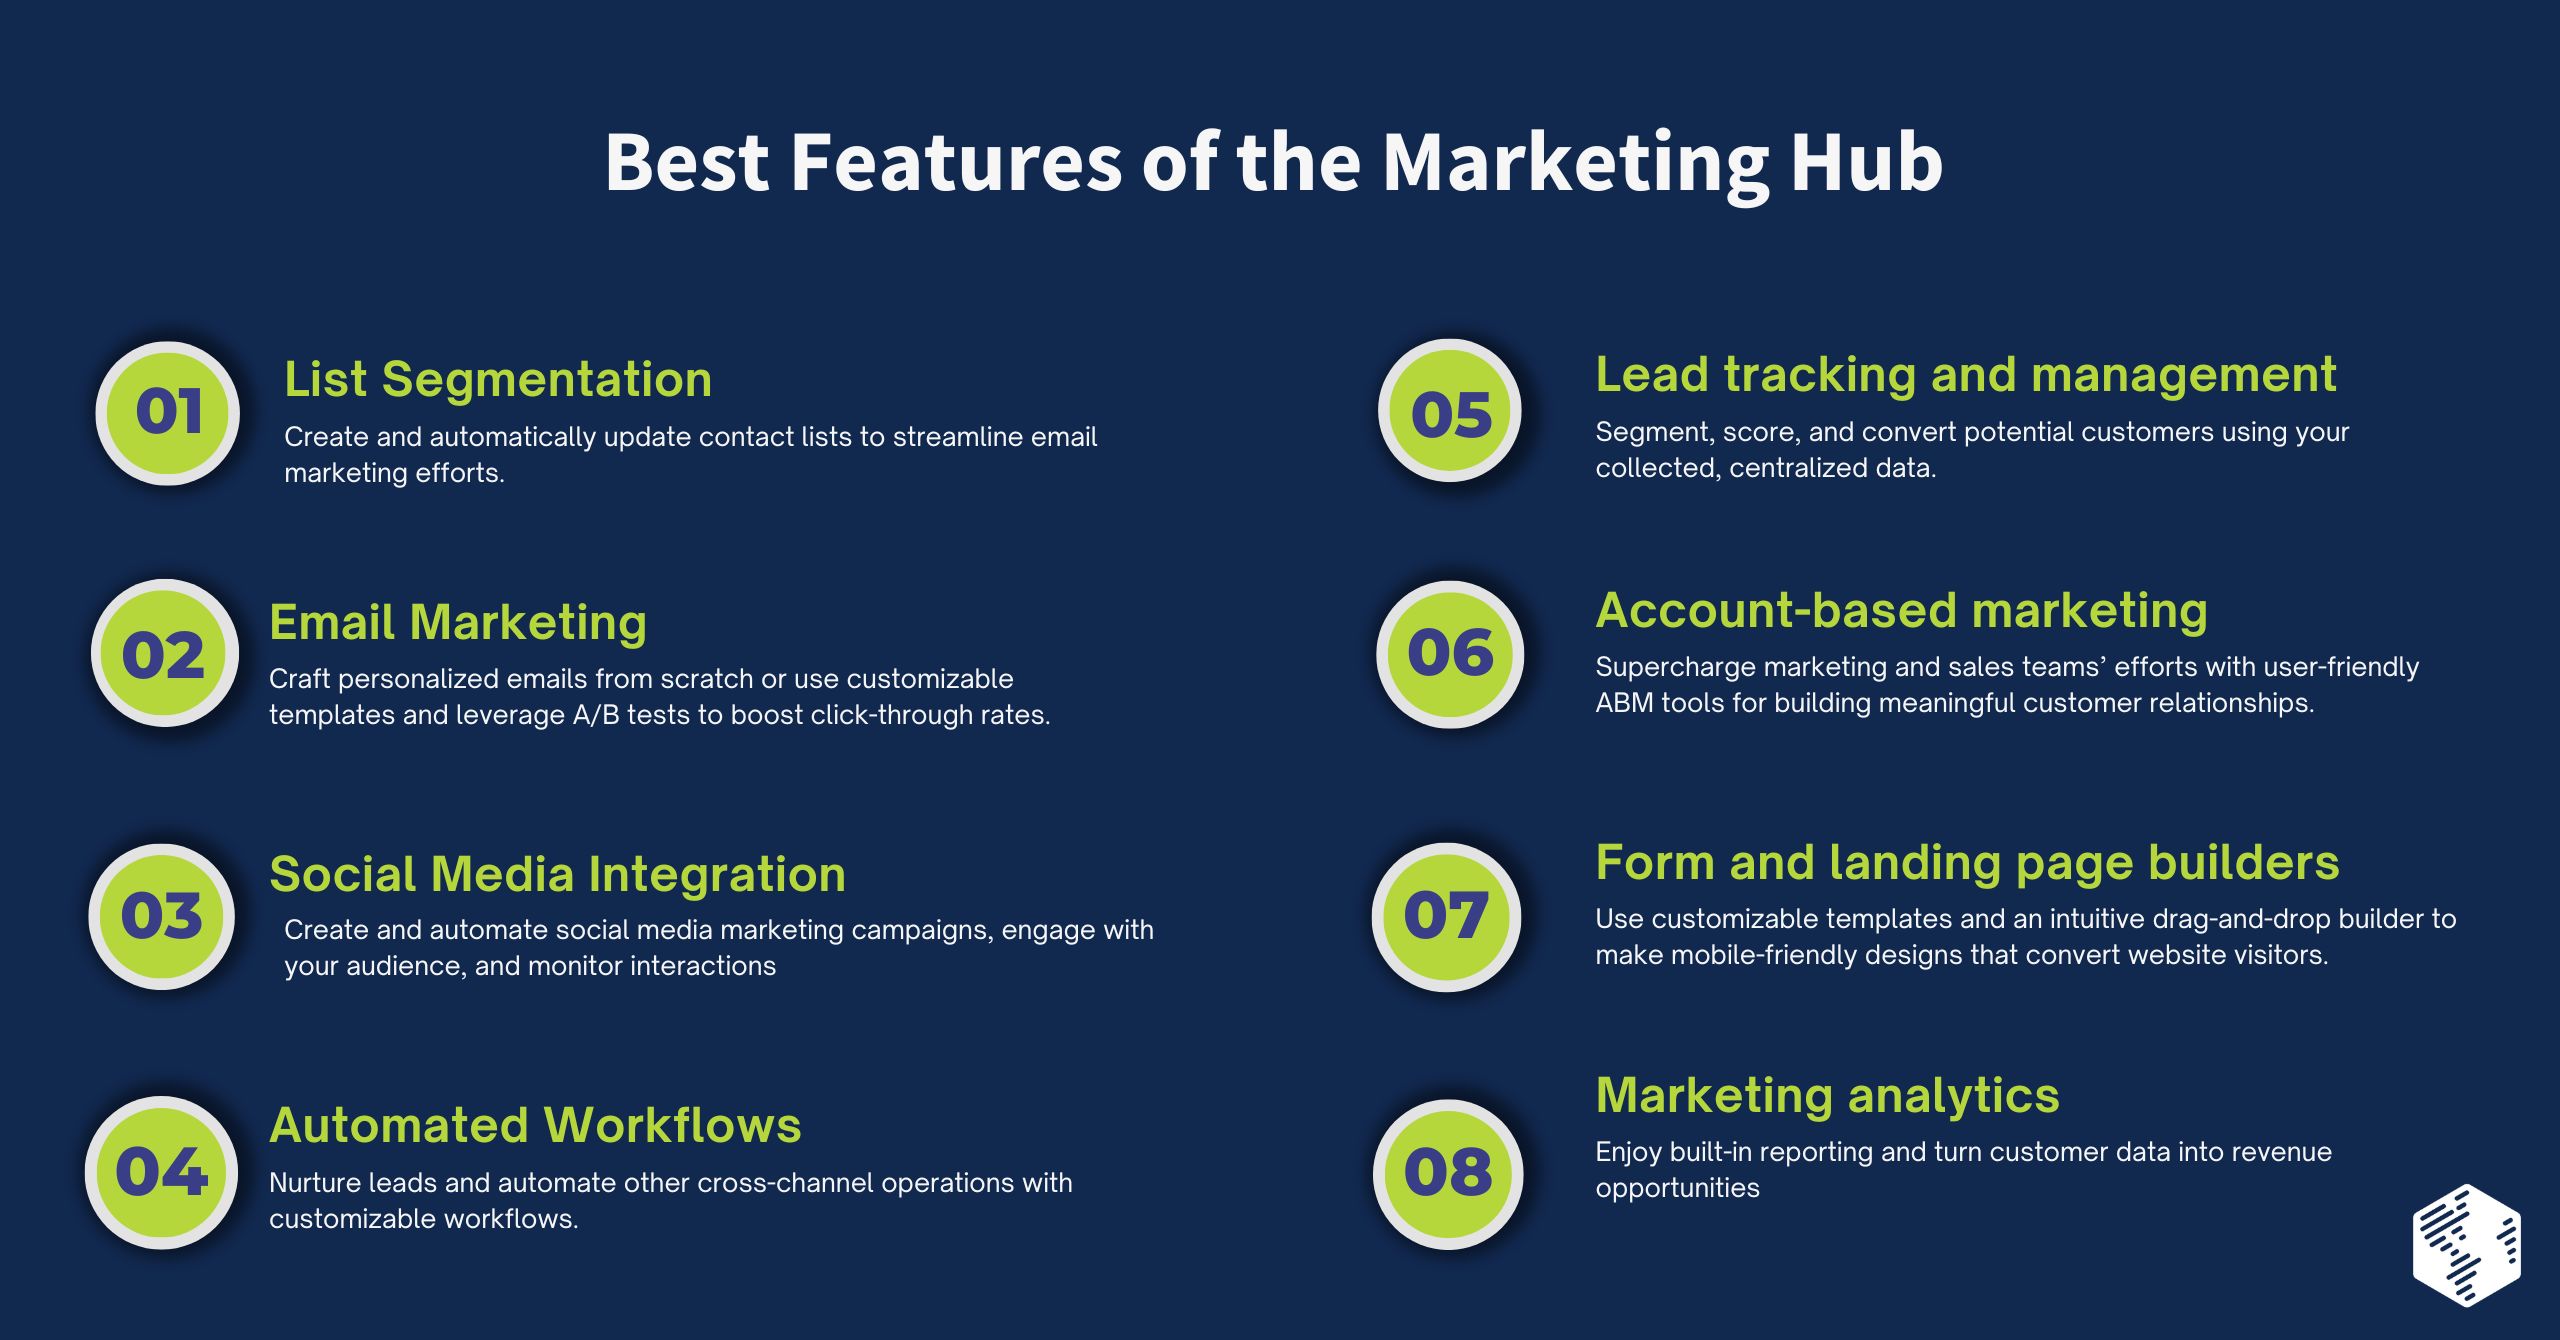 Best Features of the Marketing Hub